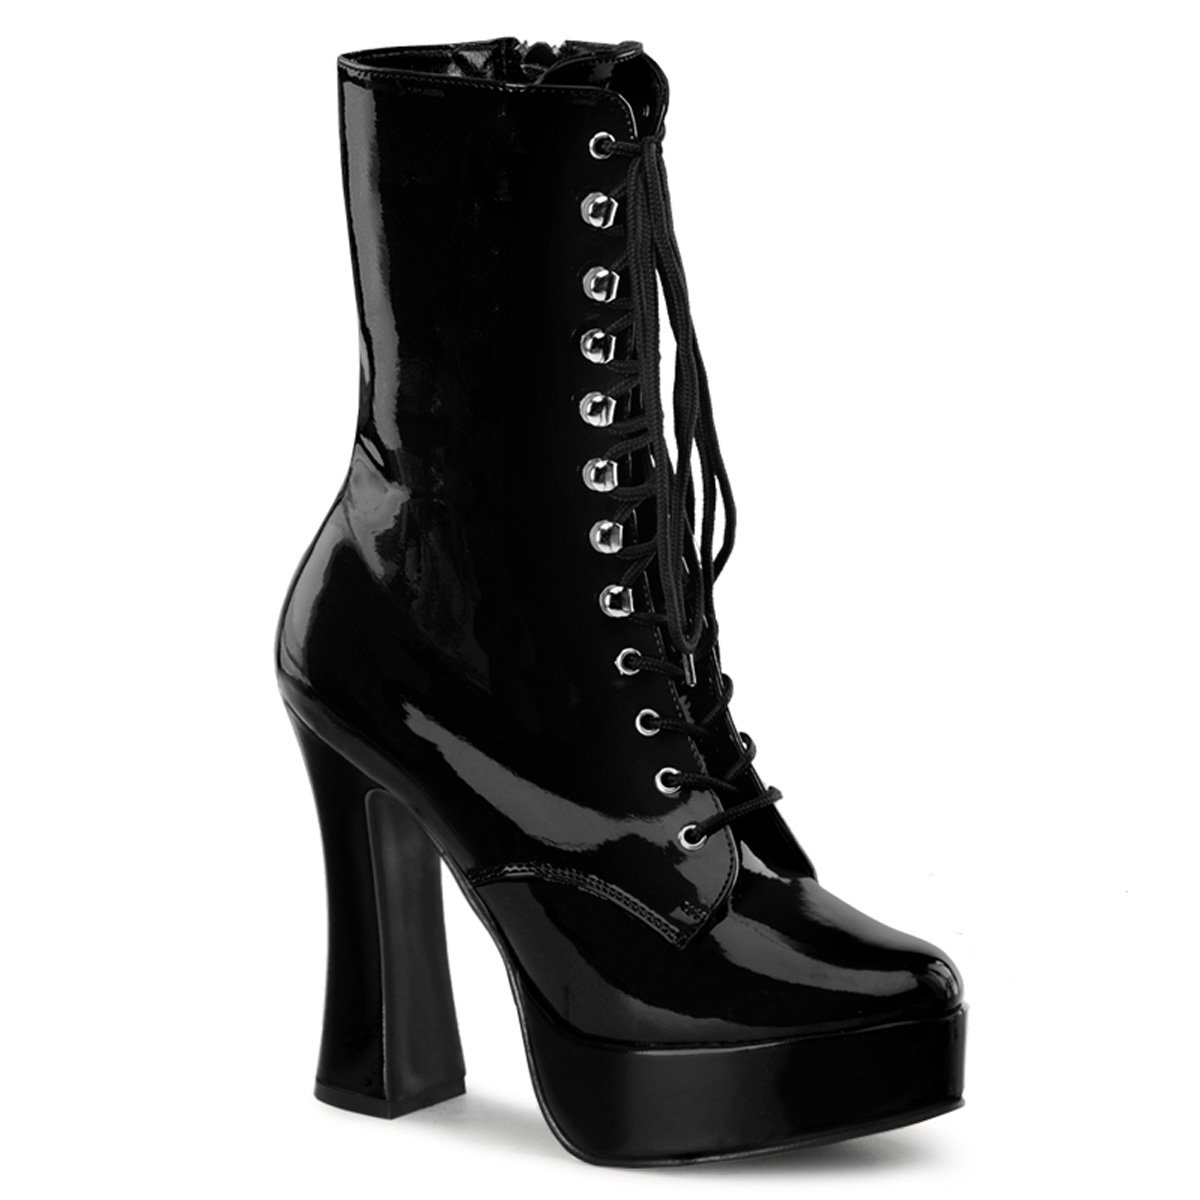 Pleaser Electra-1020 Platforms | Buy Sexy Shoes at Shoefreaks.ca